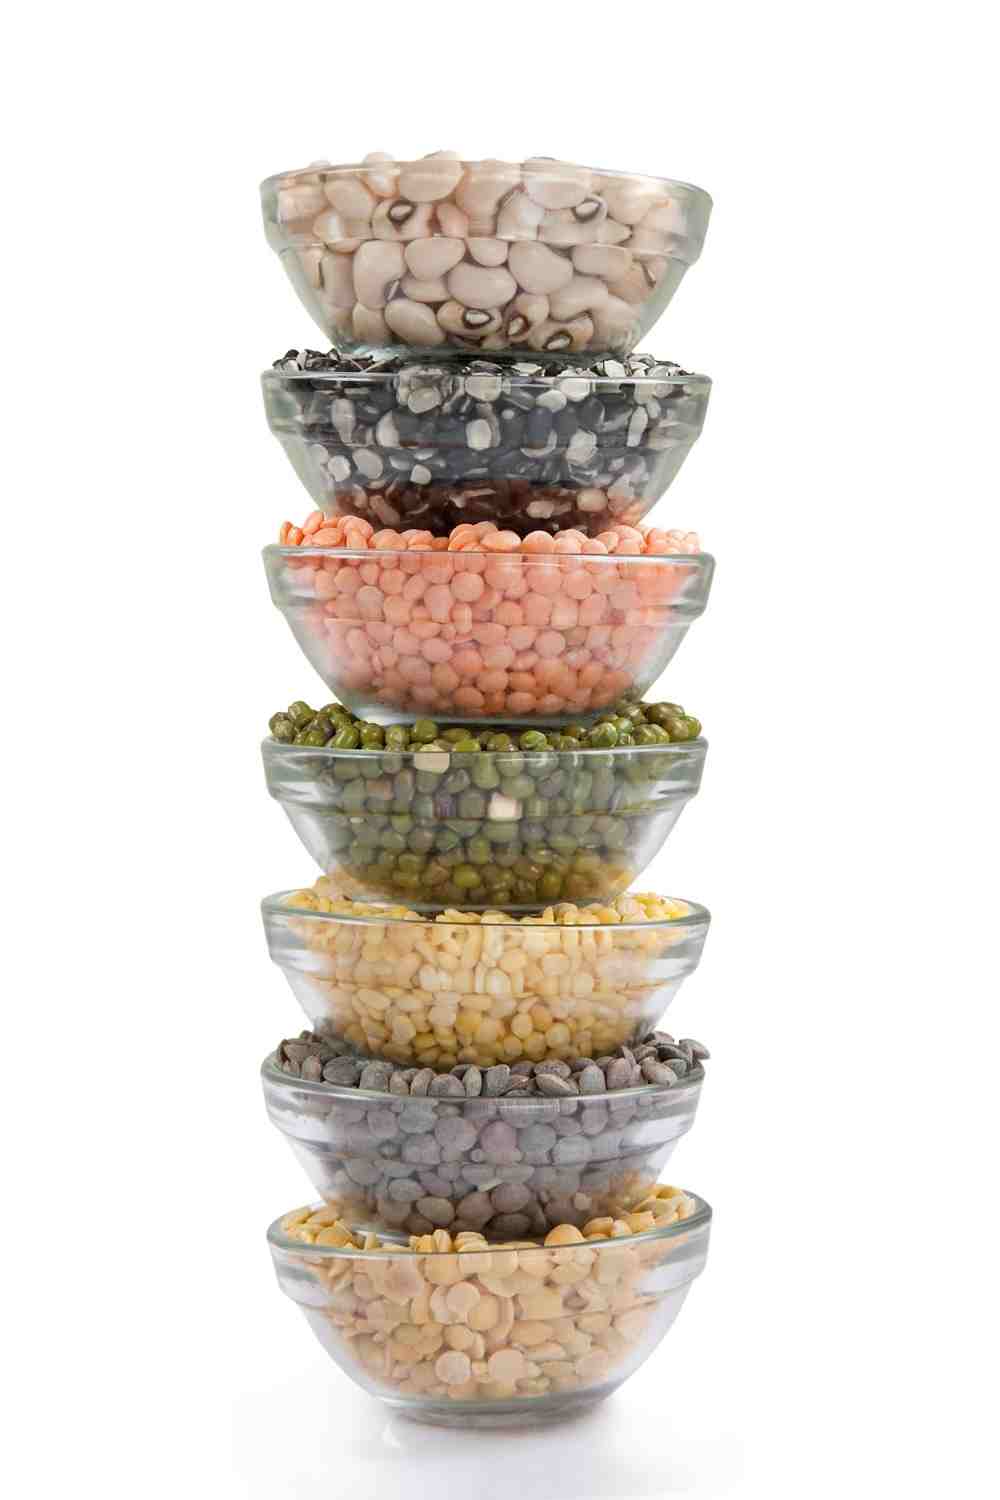 Pulses And Grains